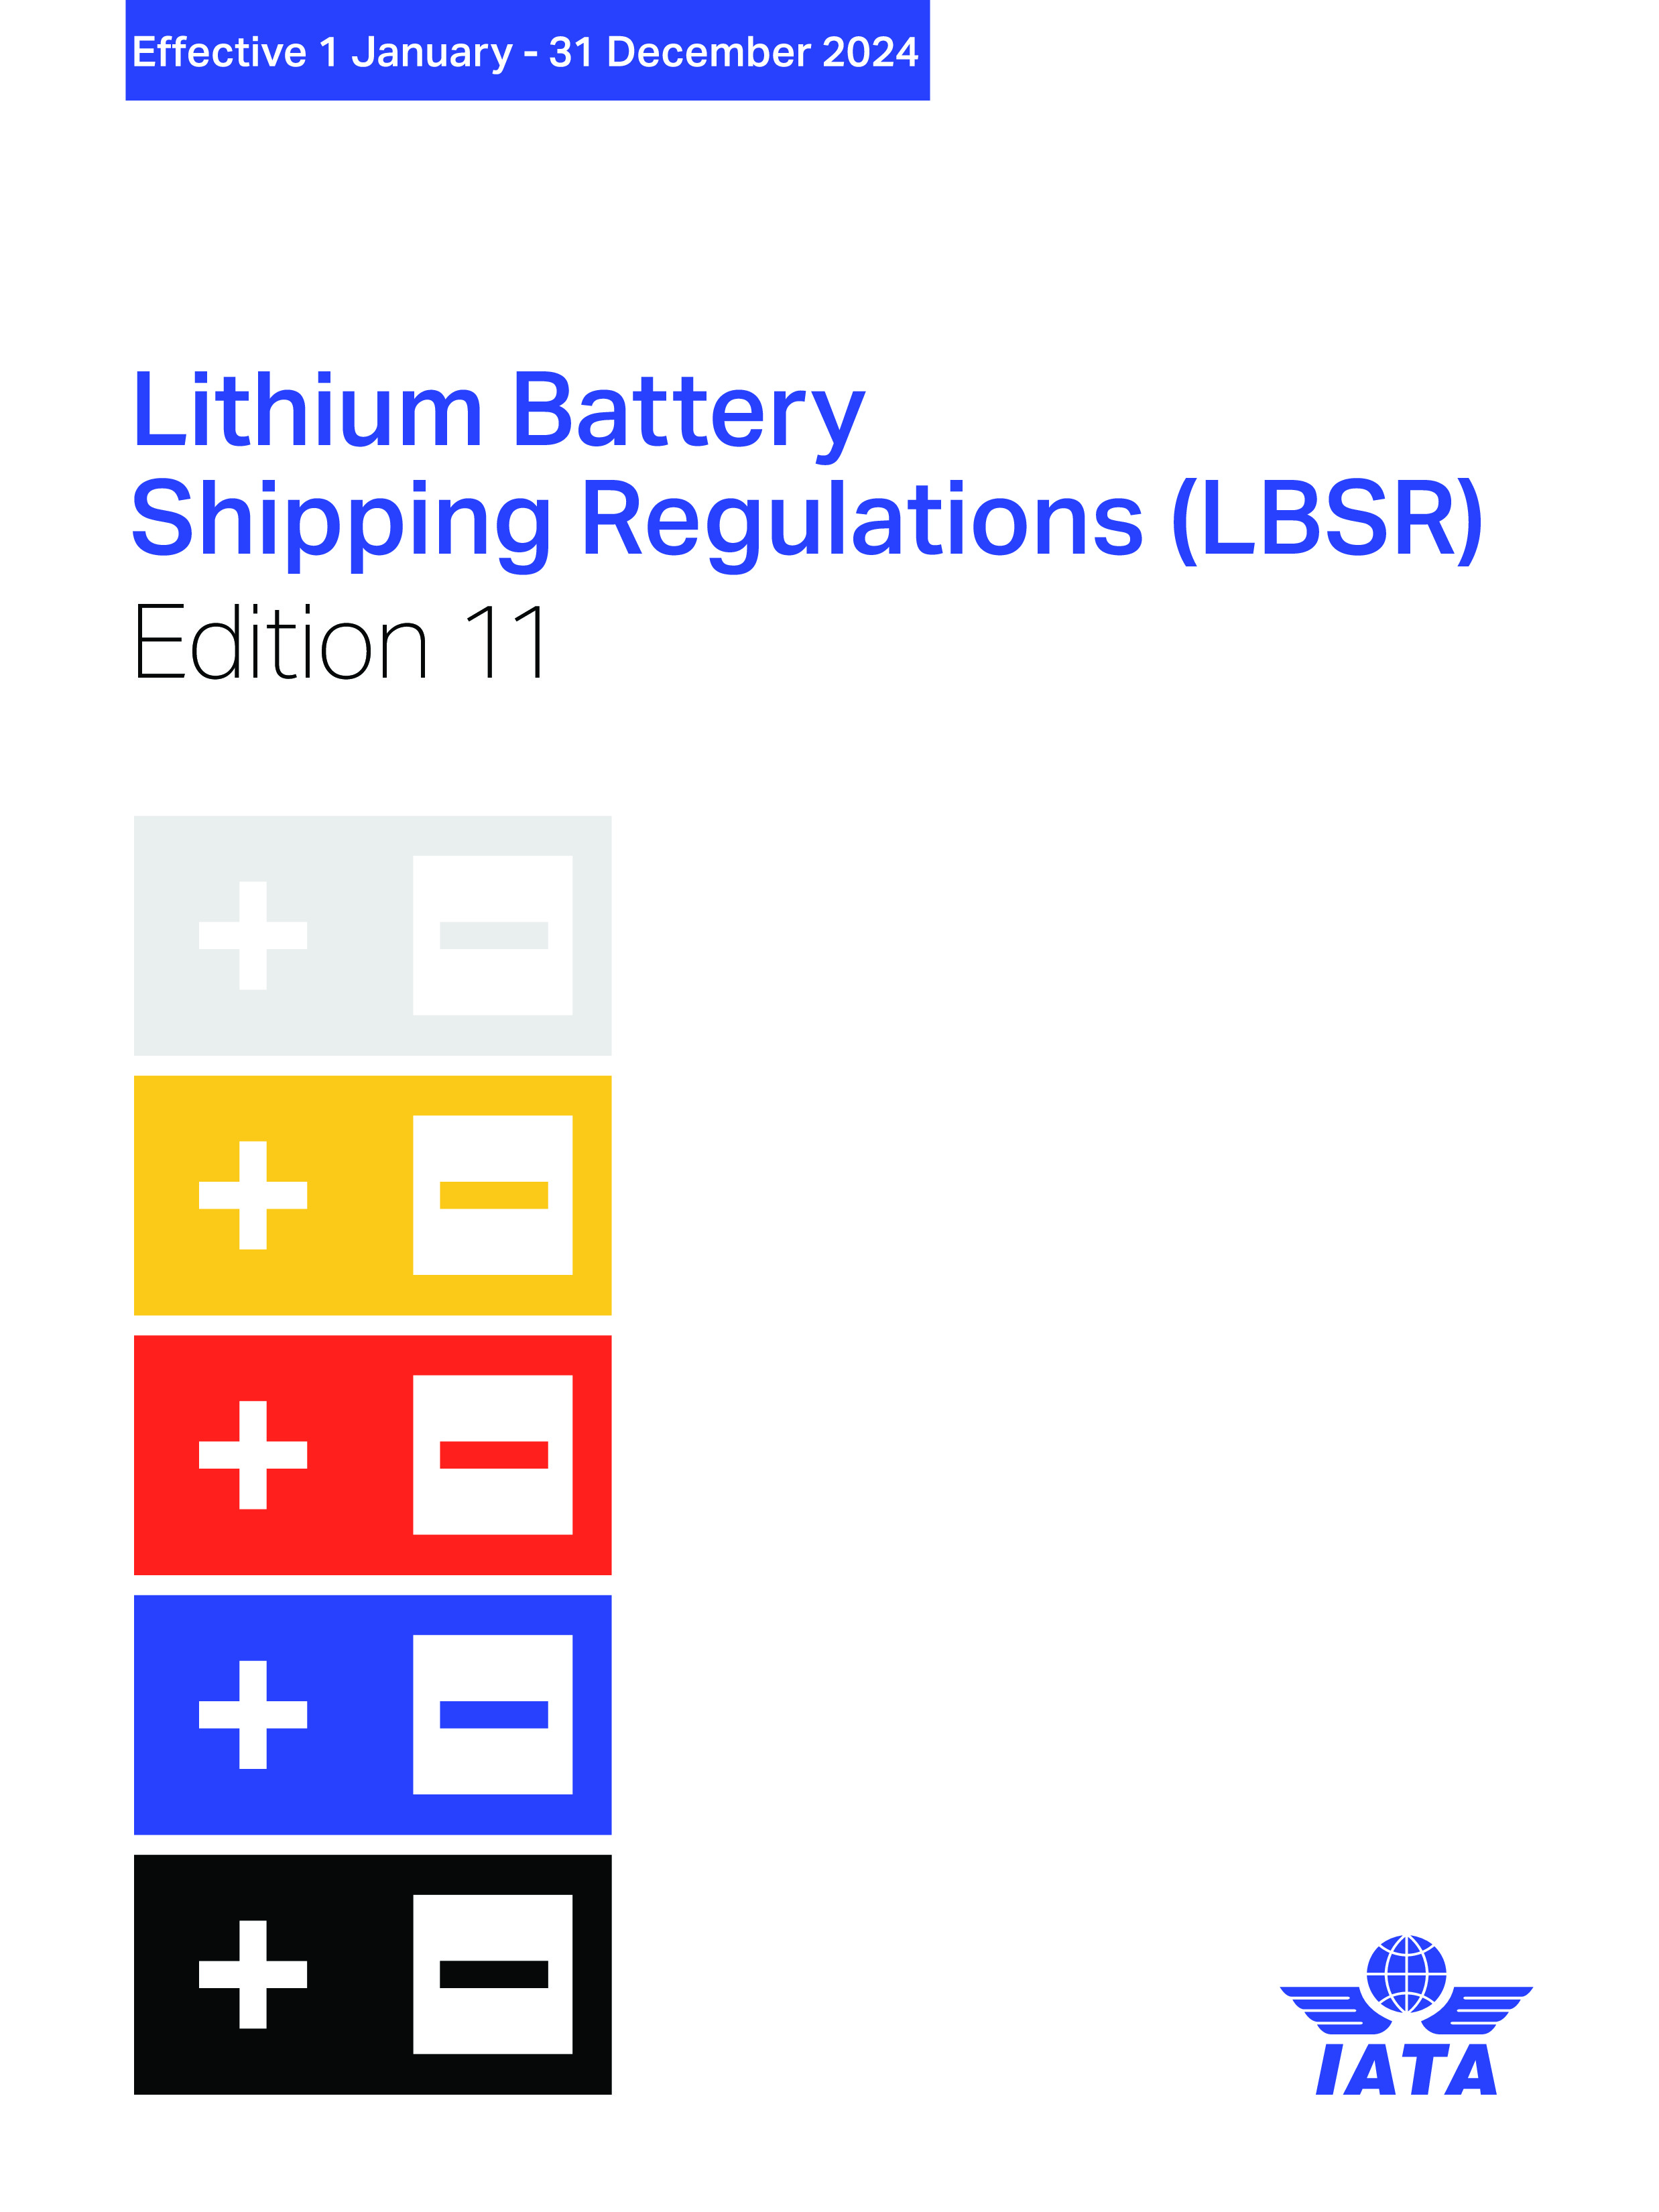 2024 Lithium Baterry Shipping Regulations (Digital) 11th Ed